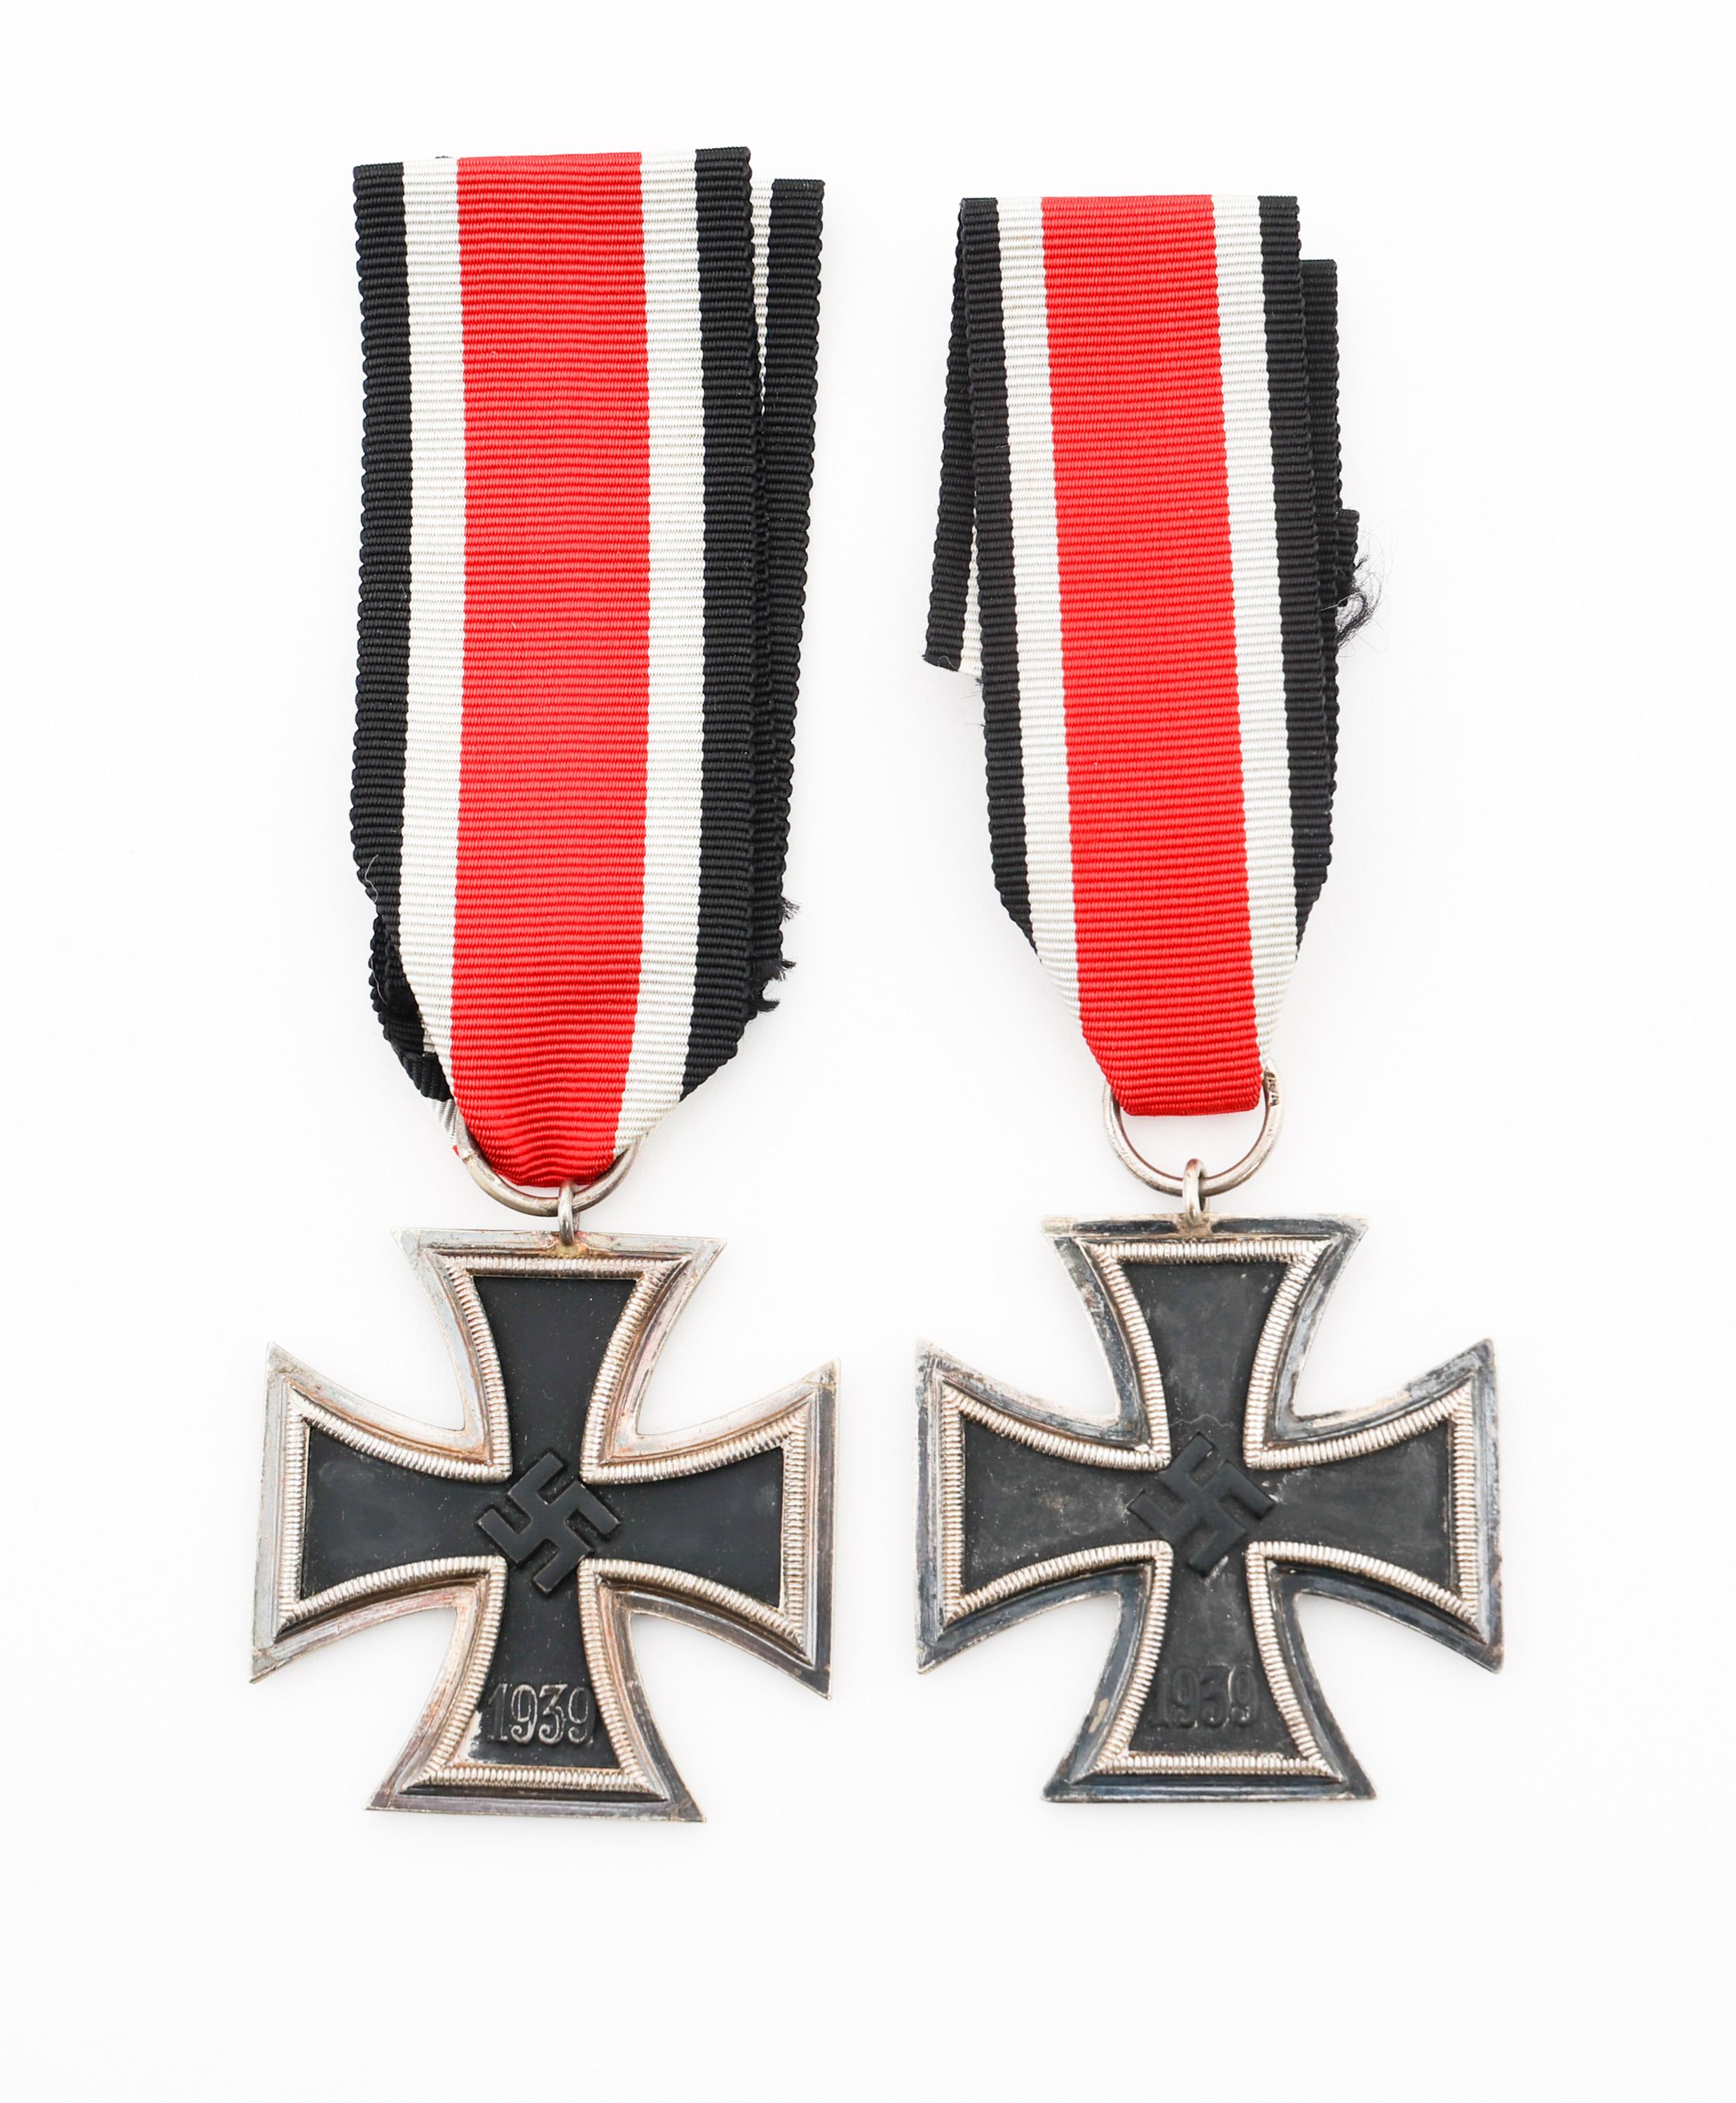 WWII GERMAN 2nd CLASS IRON CROSSES & MEDALS